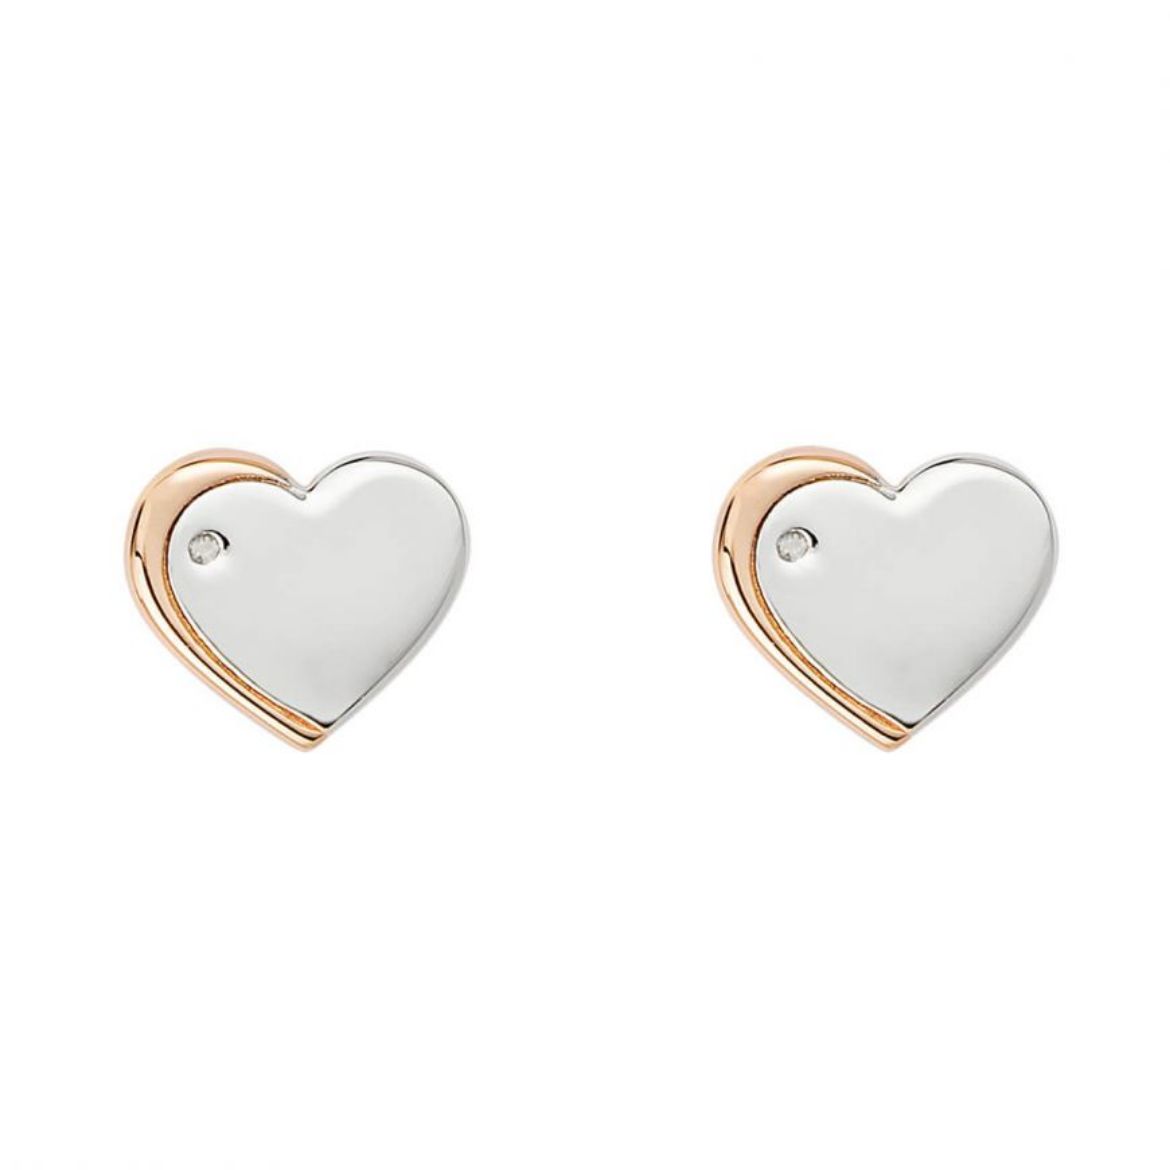 Picture of Heart Stud Earrings with Rose Gold Detail and Diamond